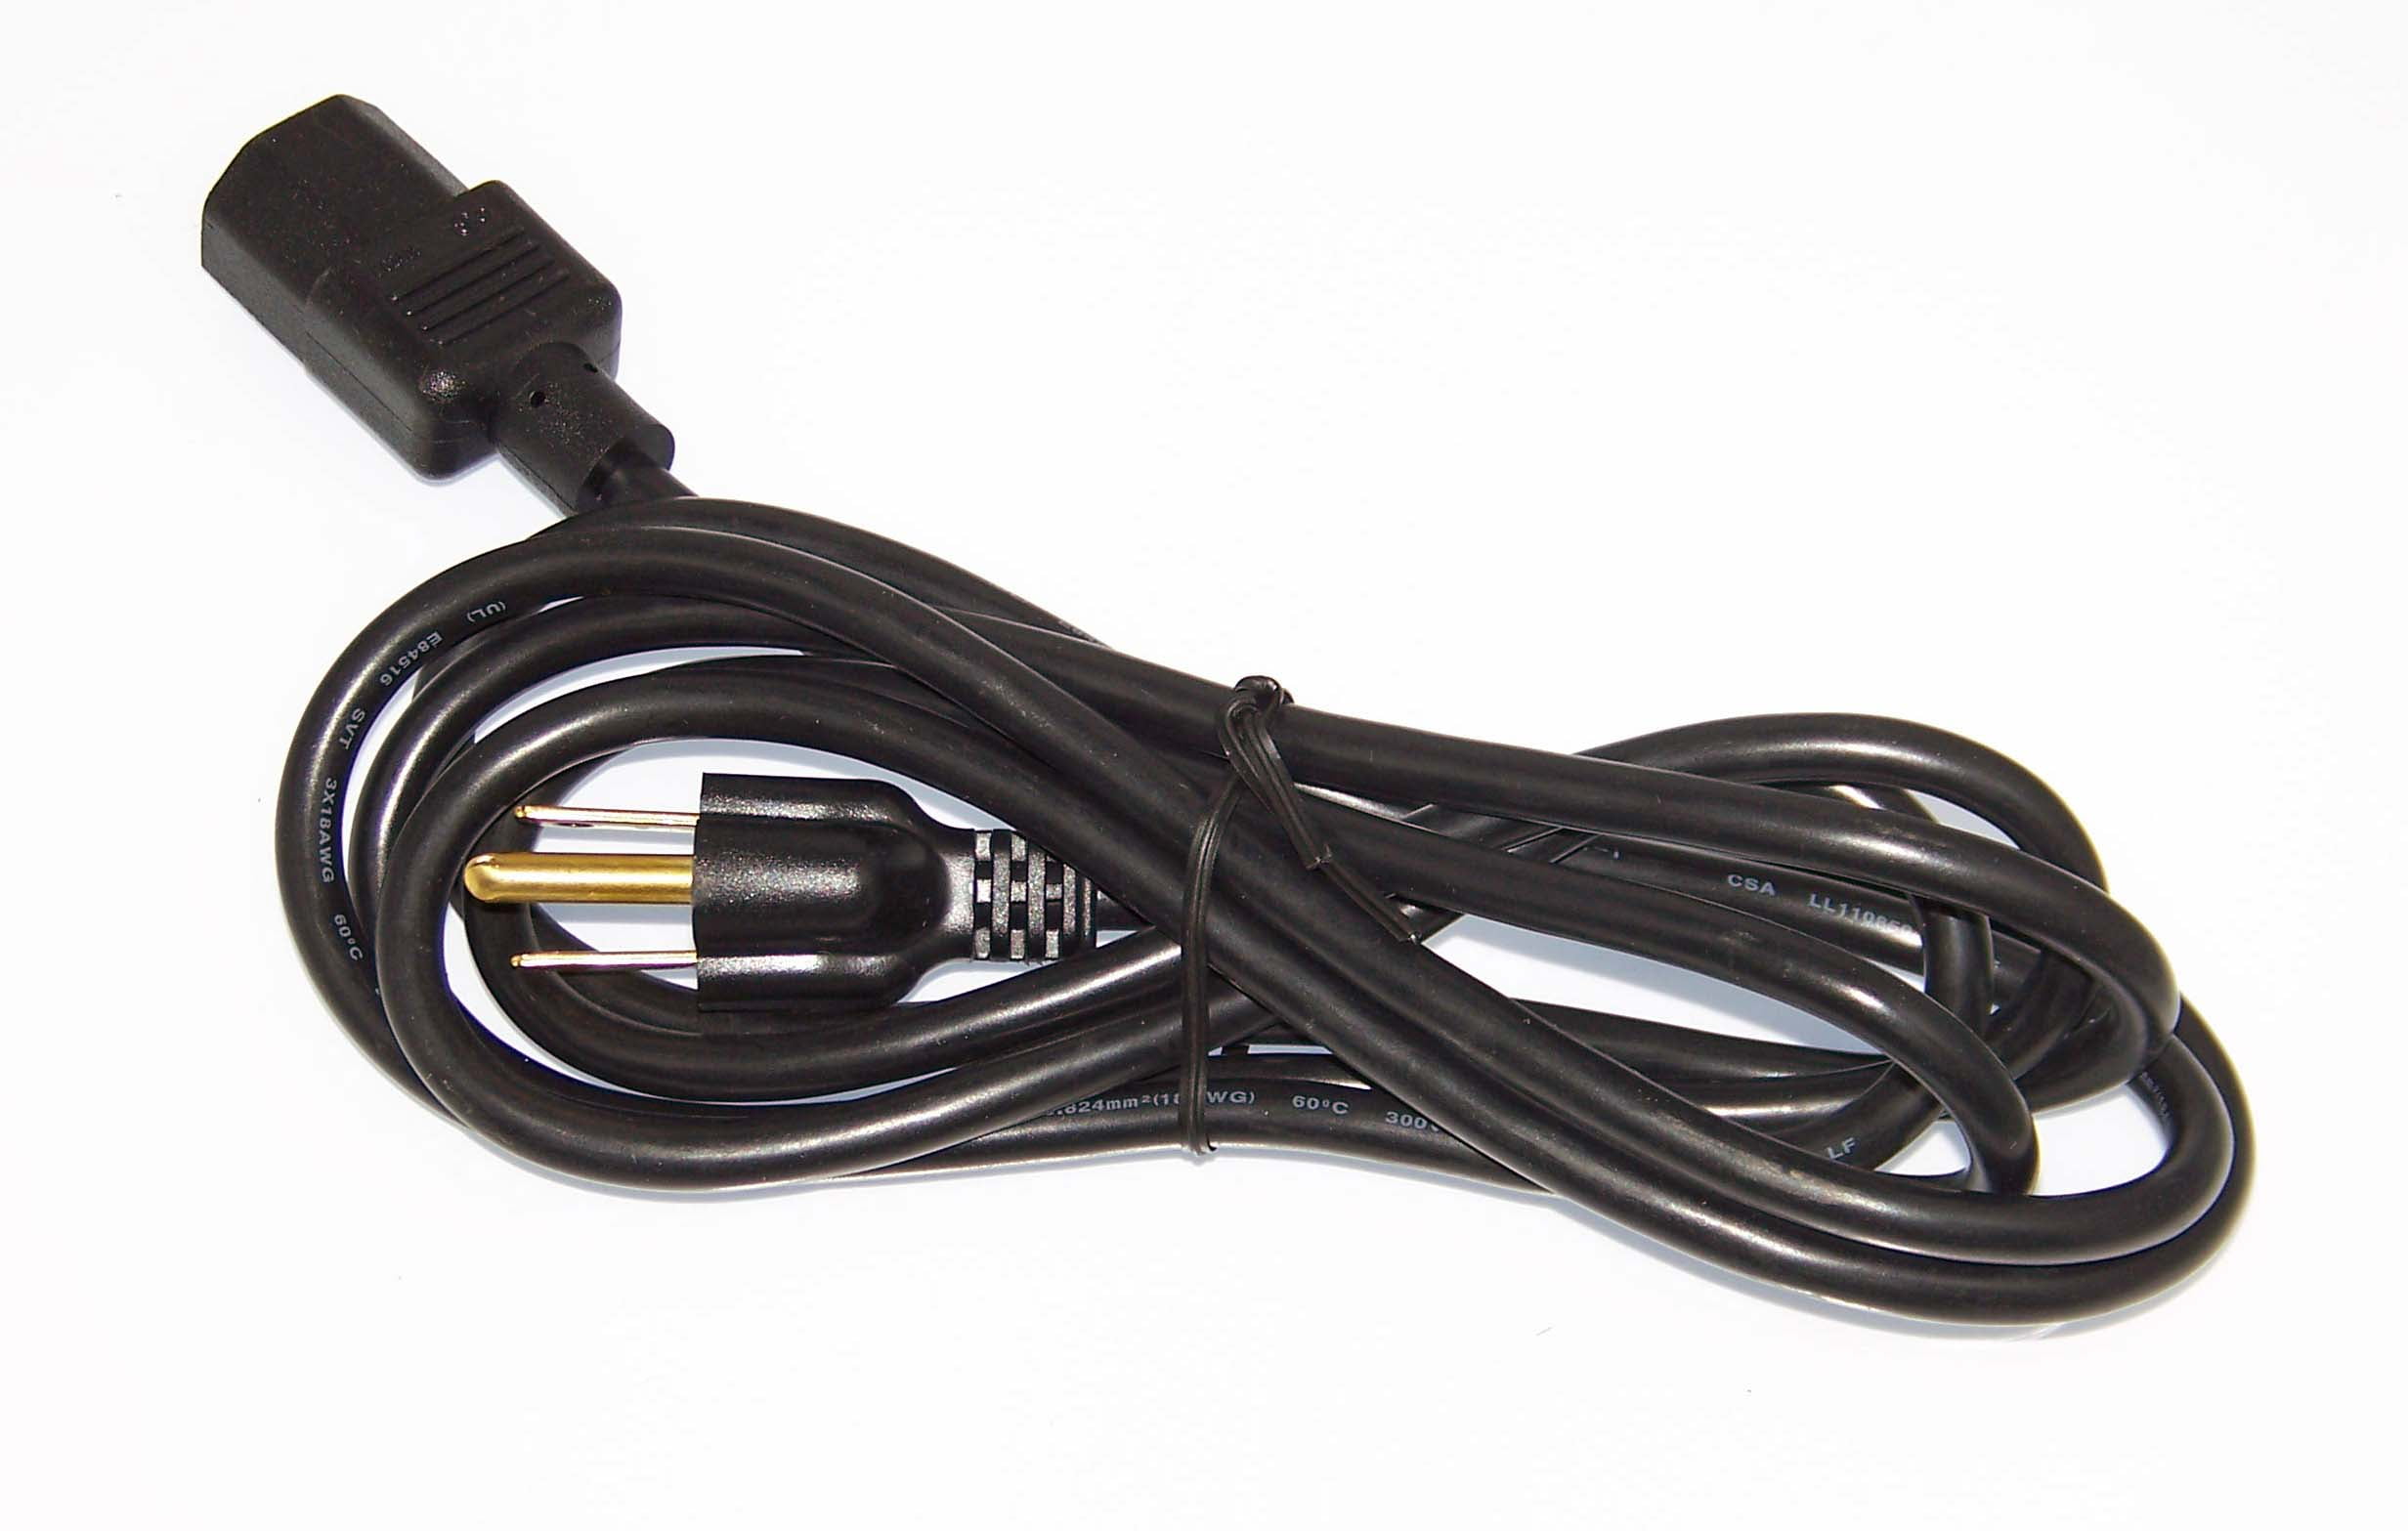 EPSON EH-TW570 H552A EX3220 LCD Projector AC power supply cord cable charger 